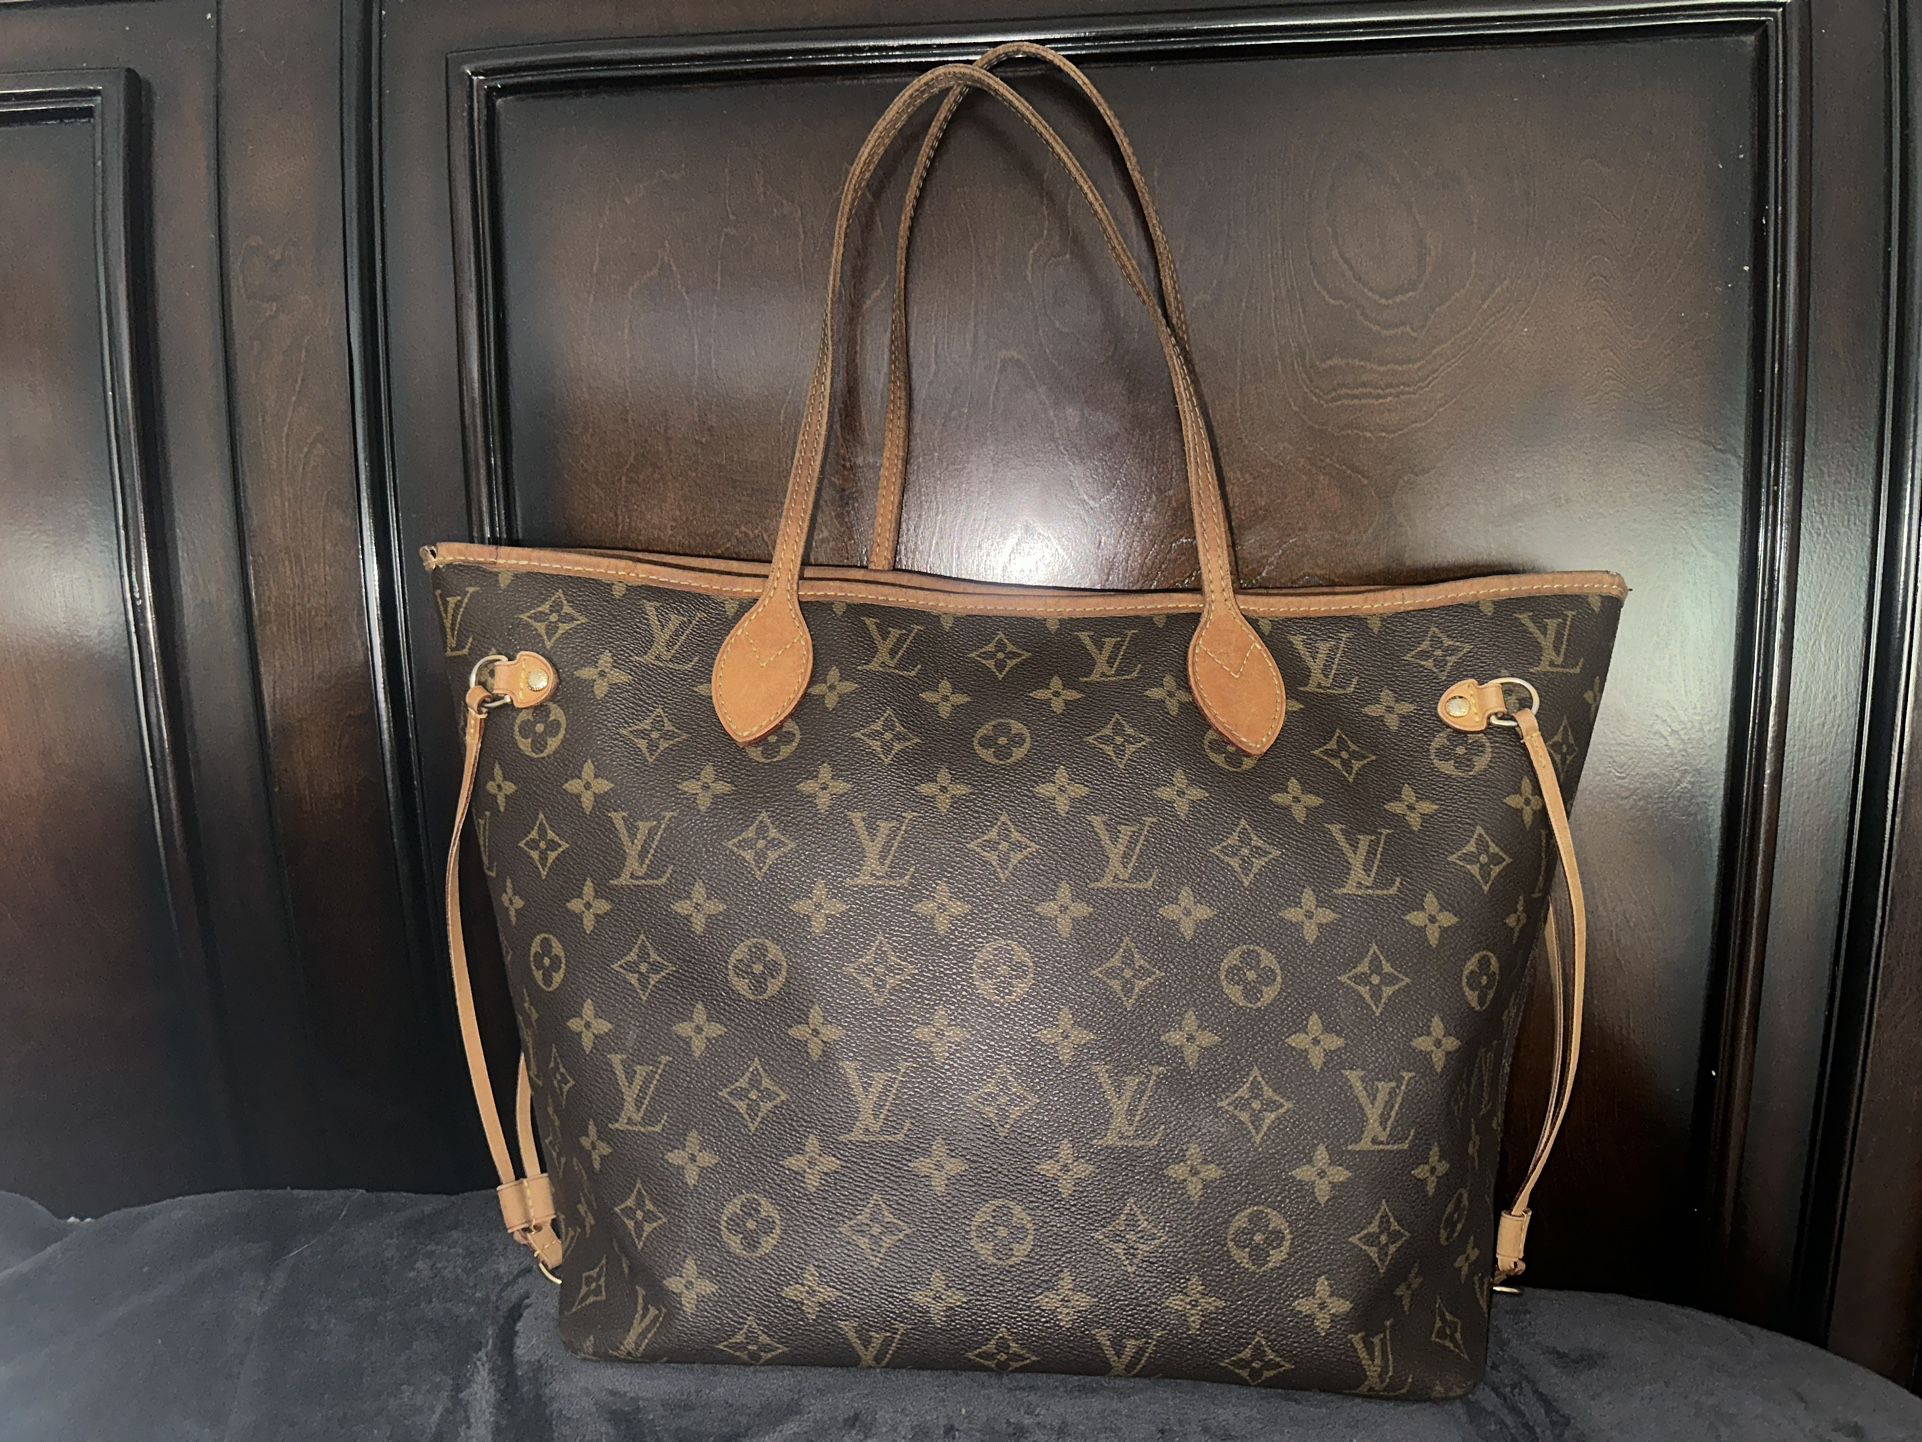 Louis Vuitton Women's Tote Bags & Certificate of Authenticity